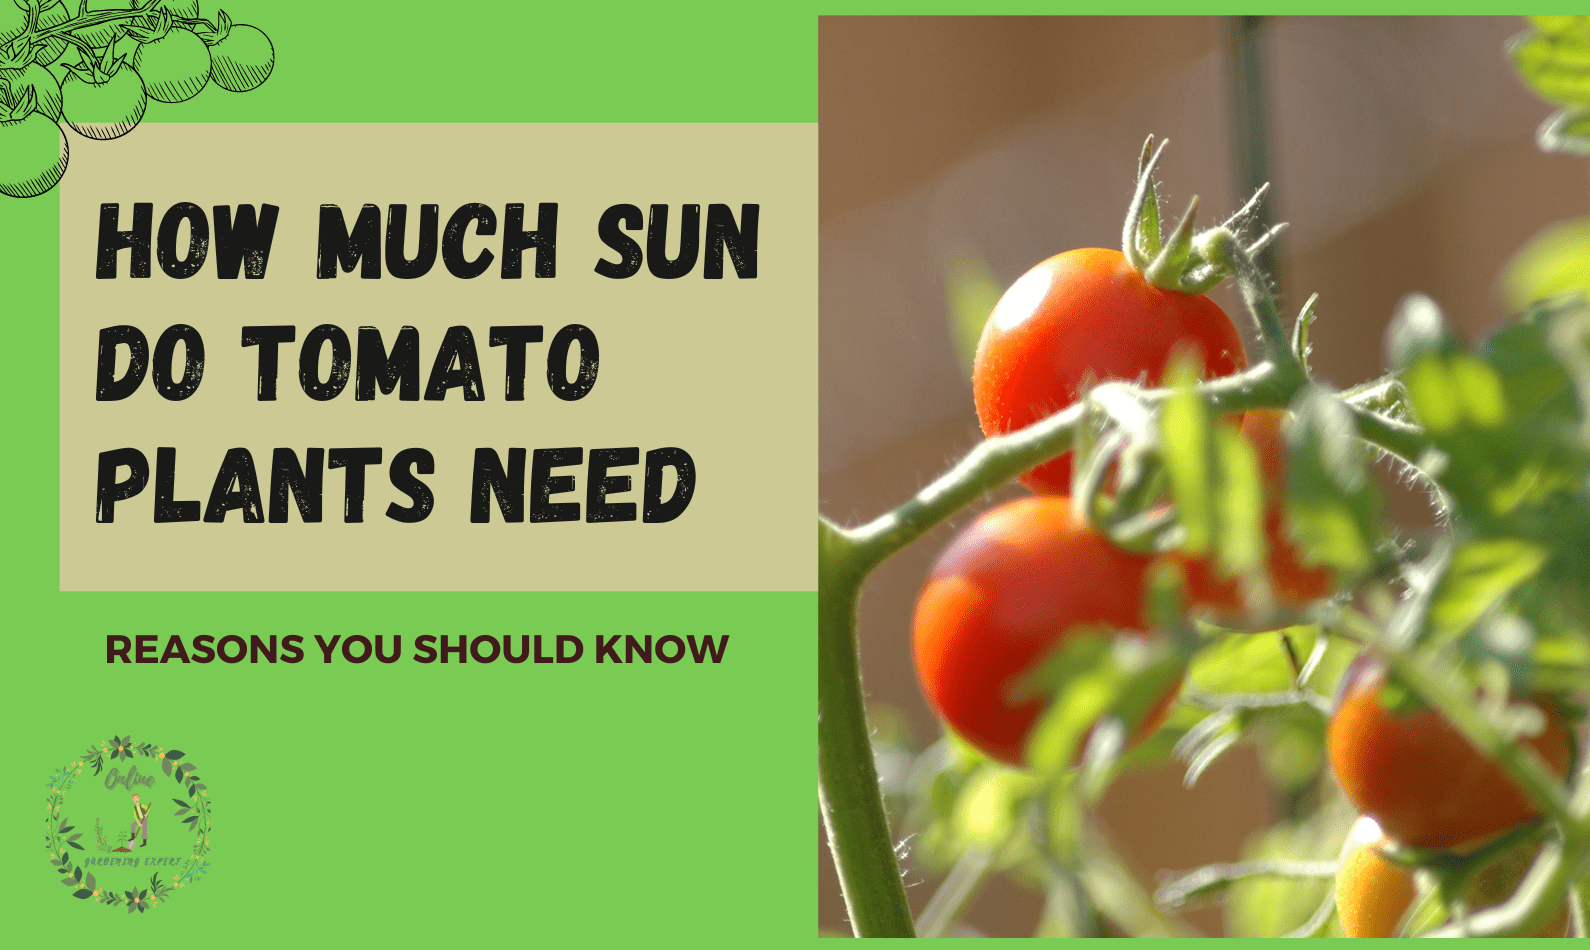 How Much Sun Do Tomato Plants Need